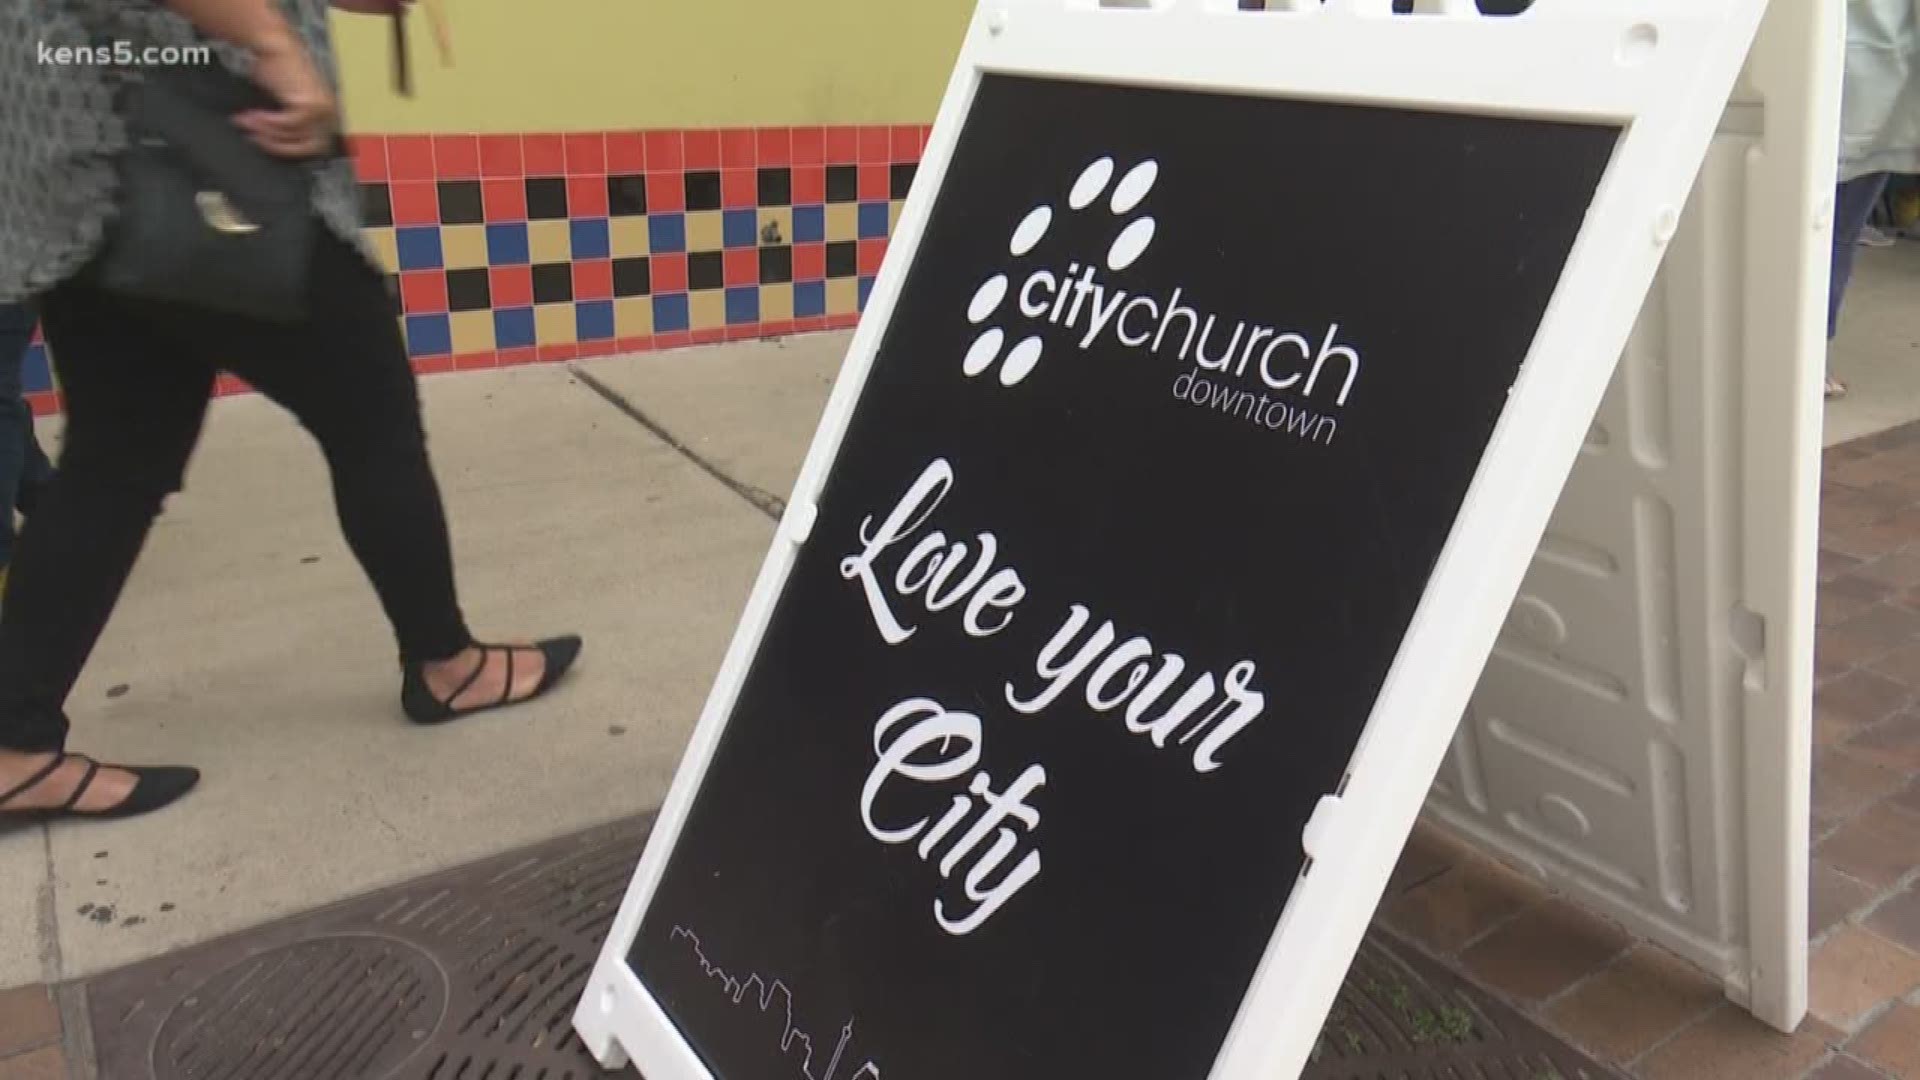 Since the city's recent ordinance preventing people from giving handouts to the homeless, a new faith-based effort has stepped up to help. The City Church downtown has been reaching out to the homeless population, providing them with food, clothing, water and hygiene items. The group is also partnering with area companies to help with housing and employment opportunities.